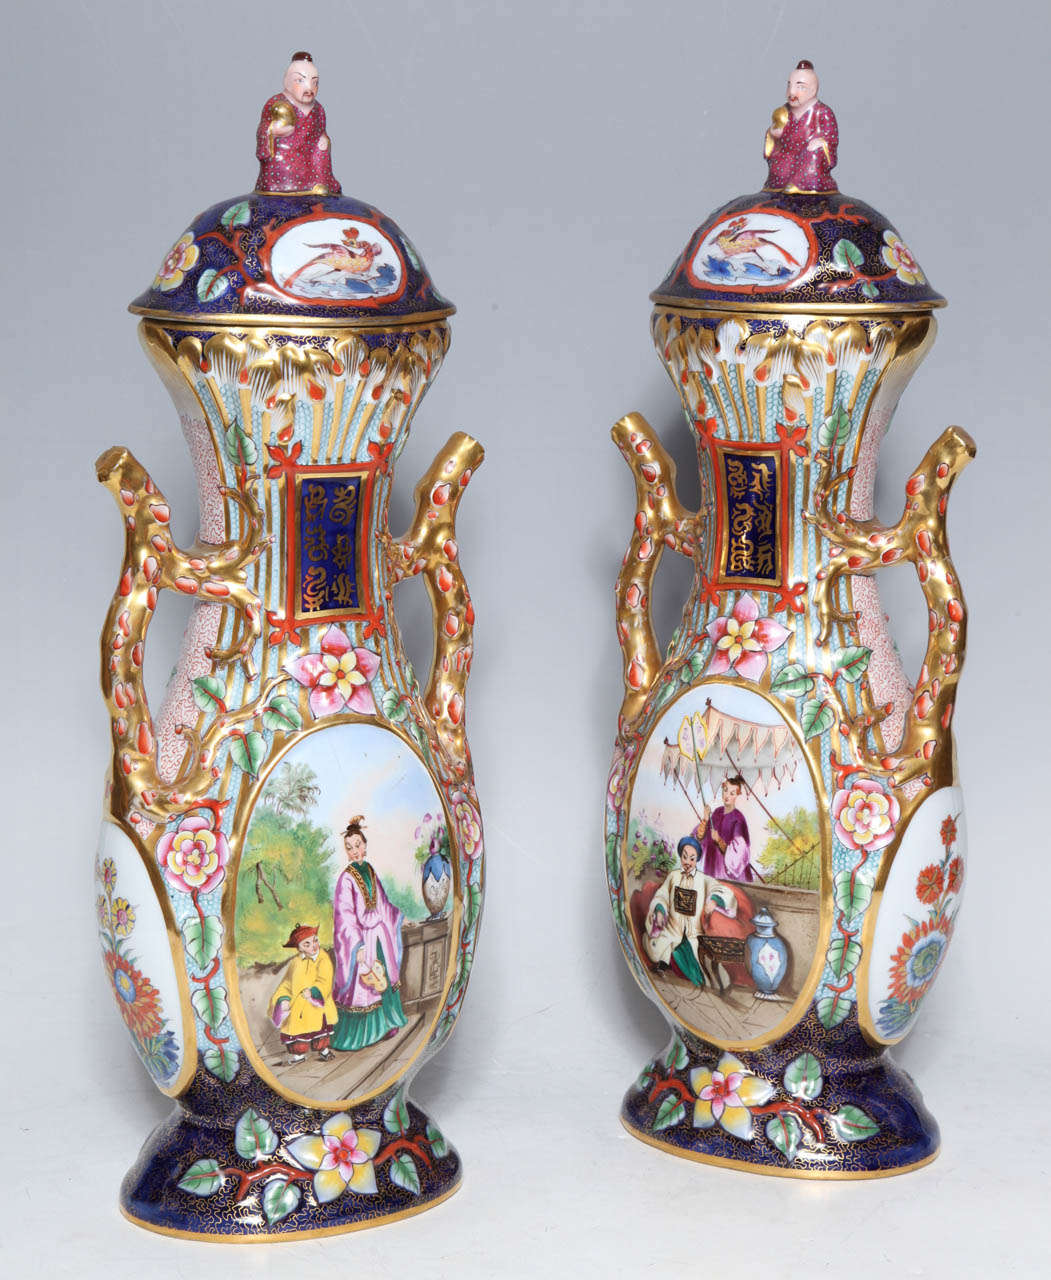 A Very unusual and fine pair of antique vases by French Jacob Petit. Chinosseri decorated, with covers and delicately crafted handles. Each vase depicts the Emperor and Empress in the Royal Garden, and a figure of an Imperial guard seated on the top